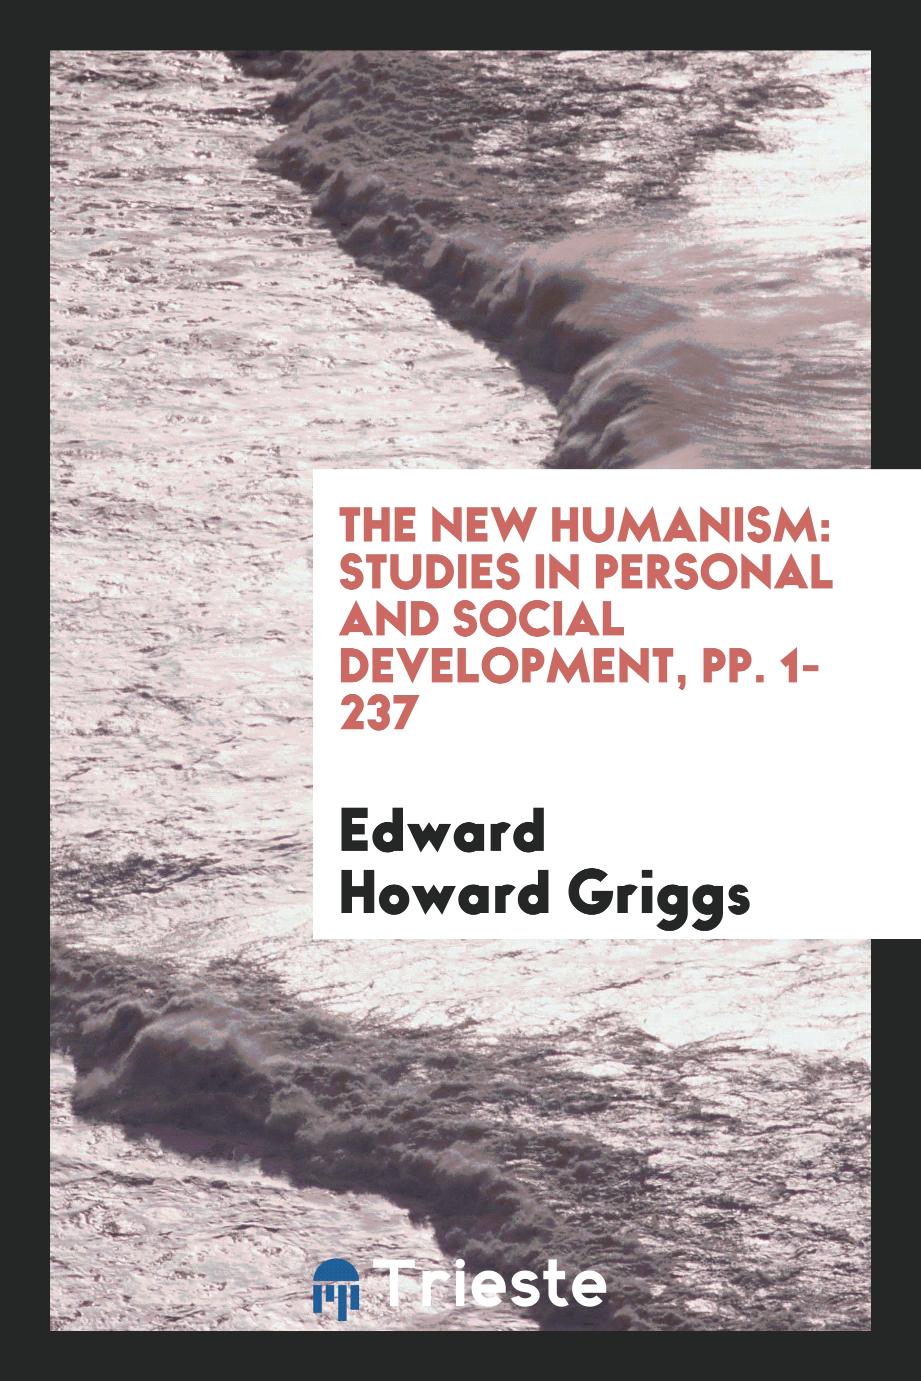 The New Humanism: Studies in Personal and Social Development, pp. 1-237